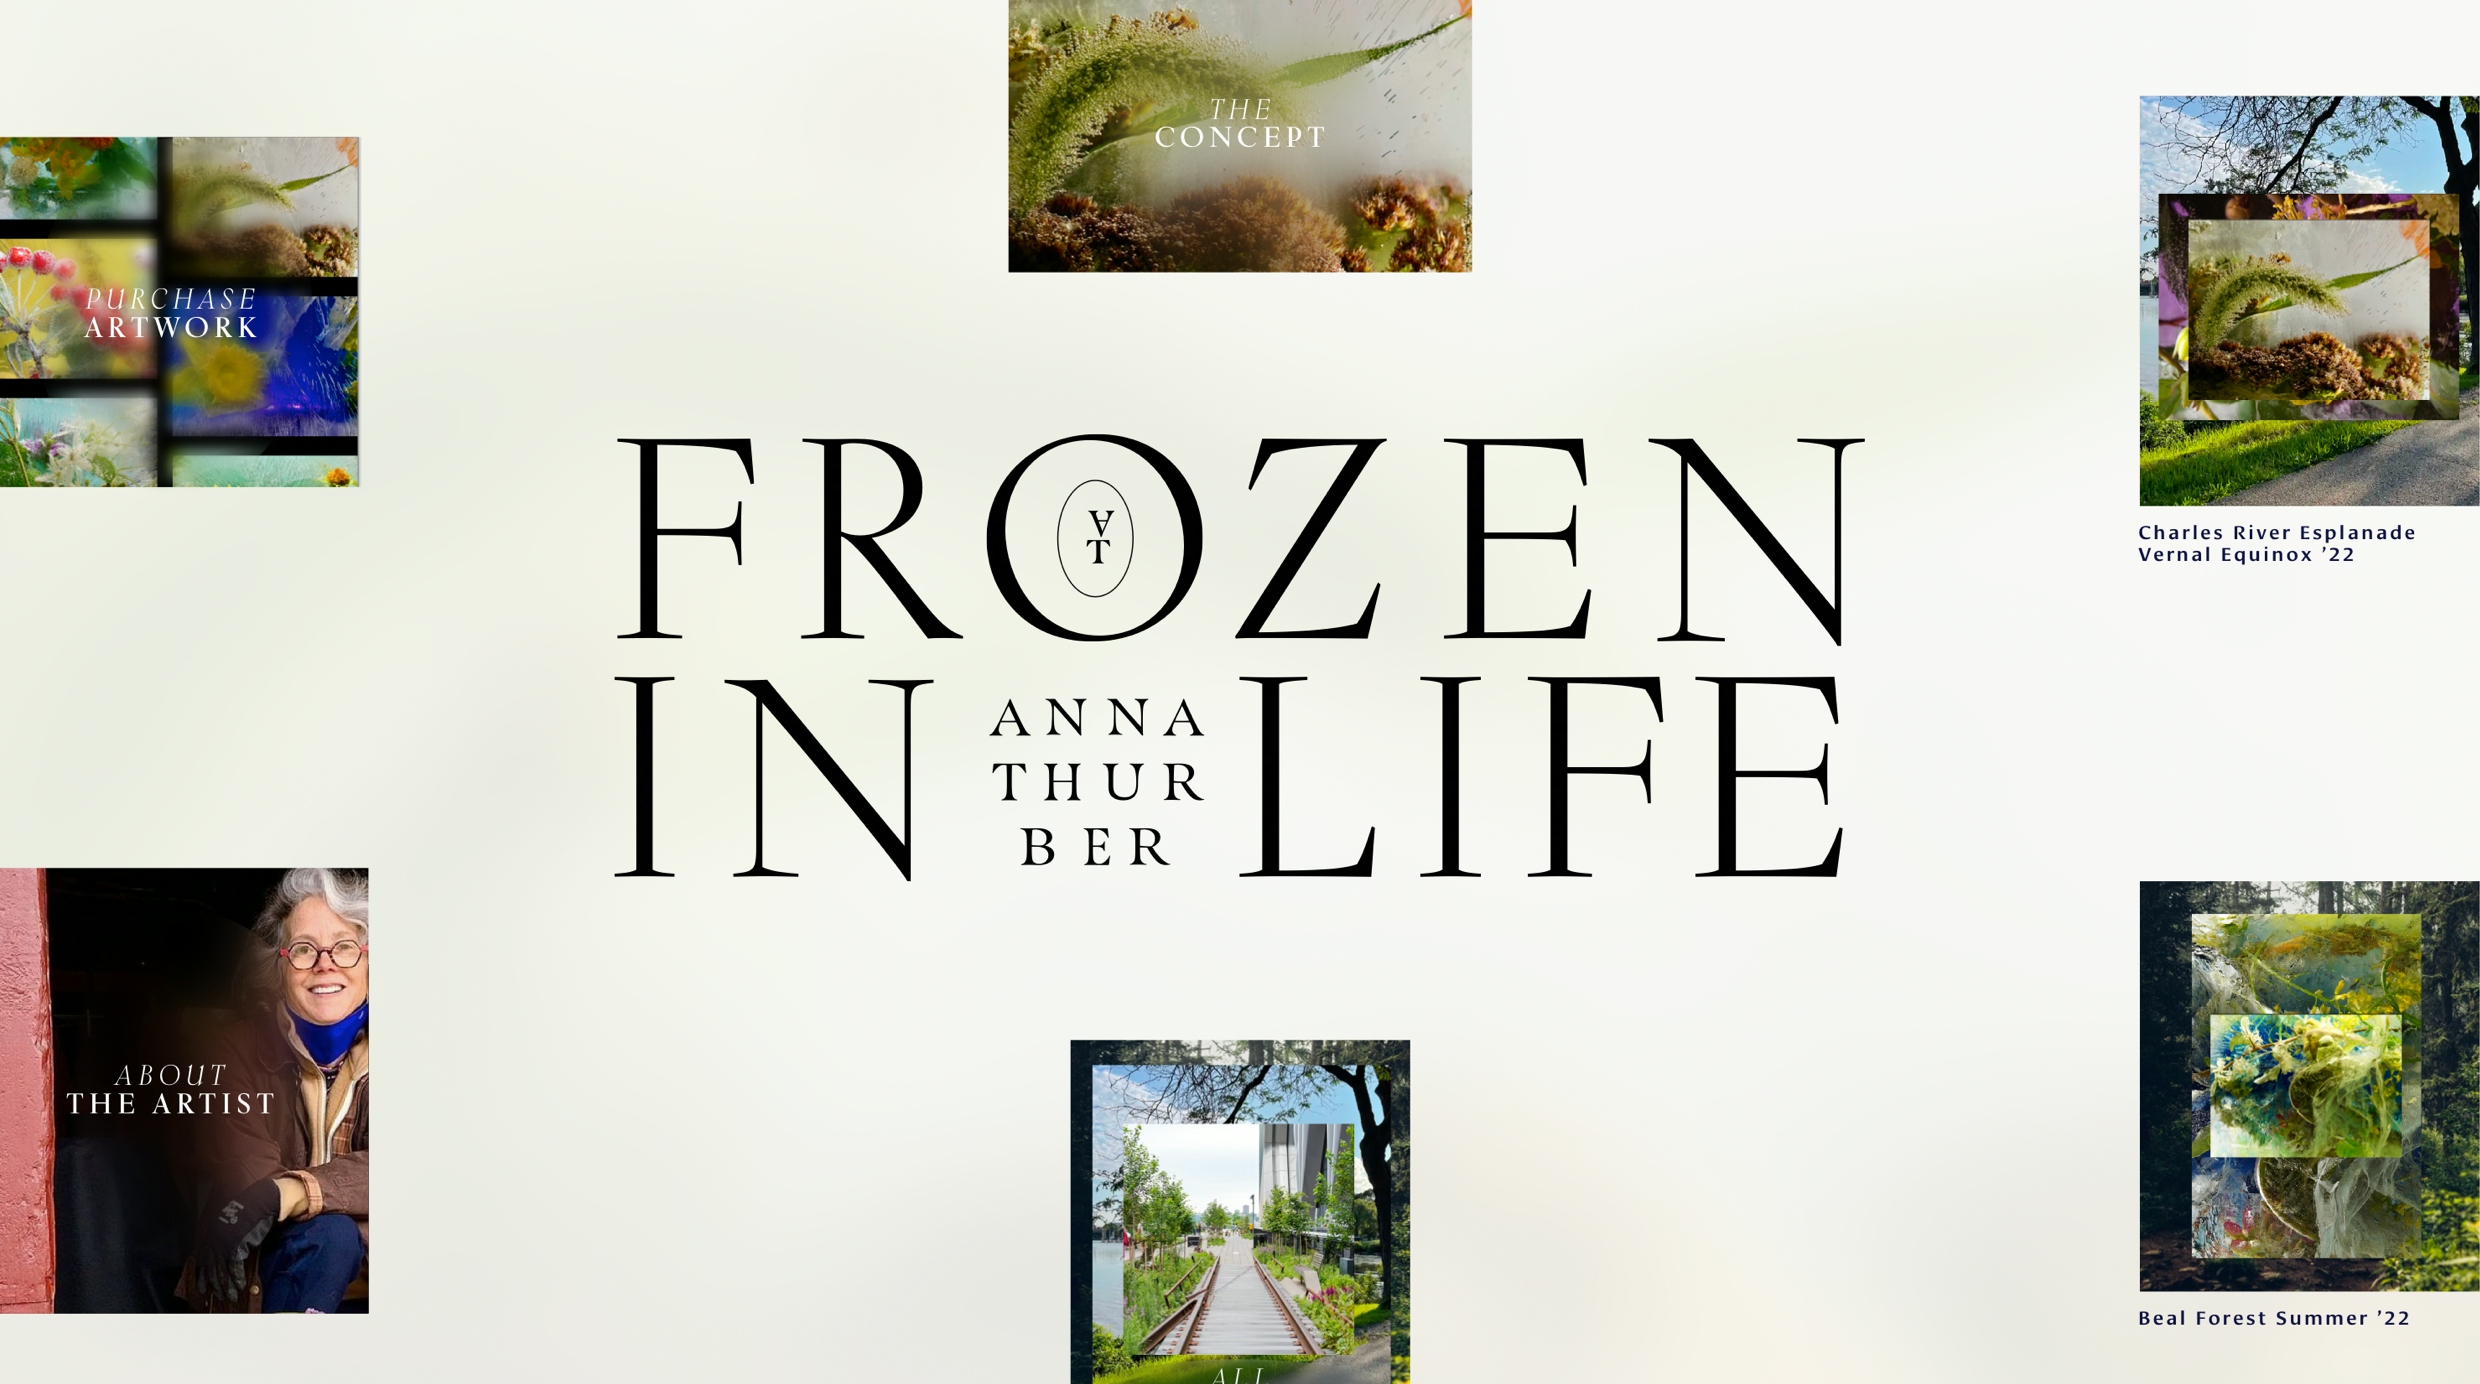 Six small project pictures feature around the “Frozen in Life” logo. “Anna Thurber” is in between the in and life in ”AT” feature in an oval in the O